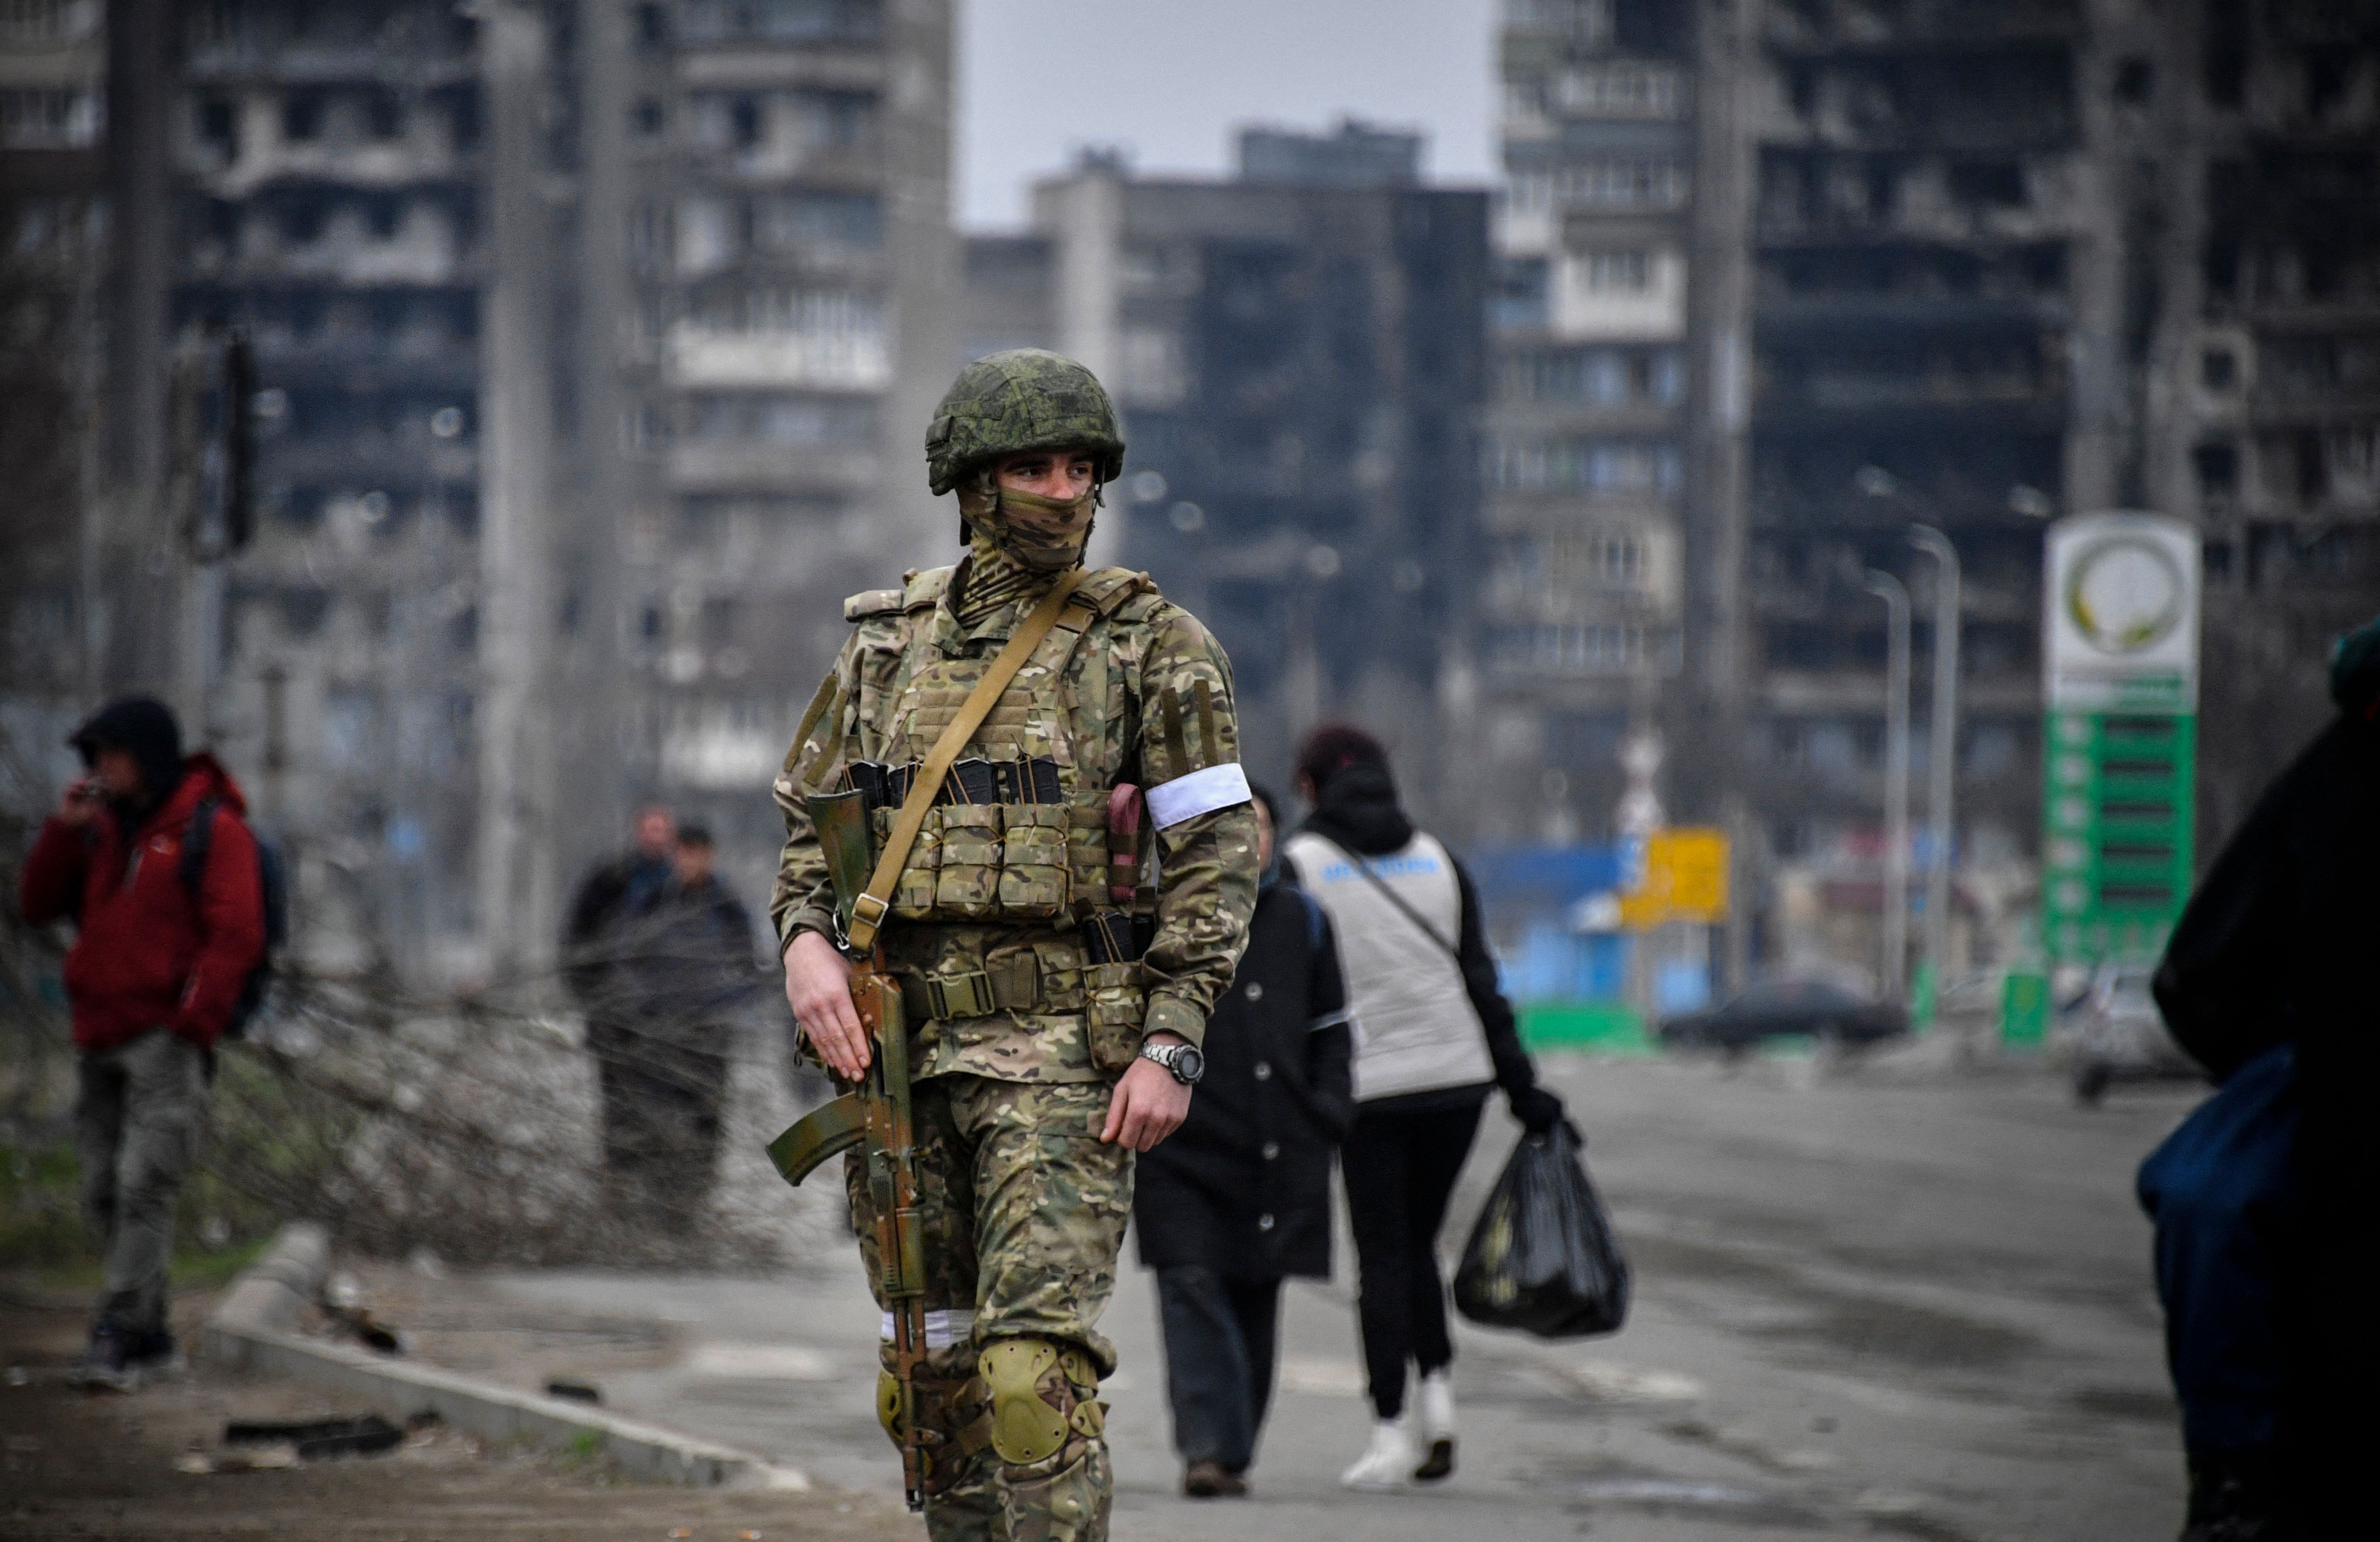 Editor's note: This photo was taken during a trip organized by the Russian military. It shows a Russian soldier on patrol in Mariupol on April 12.